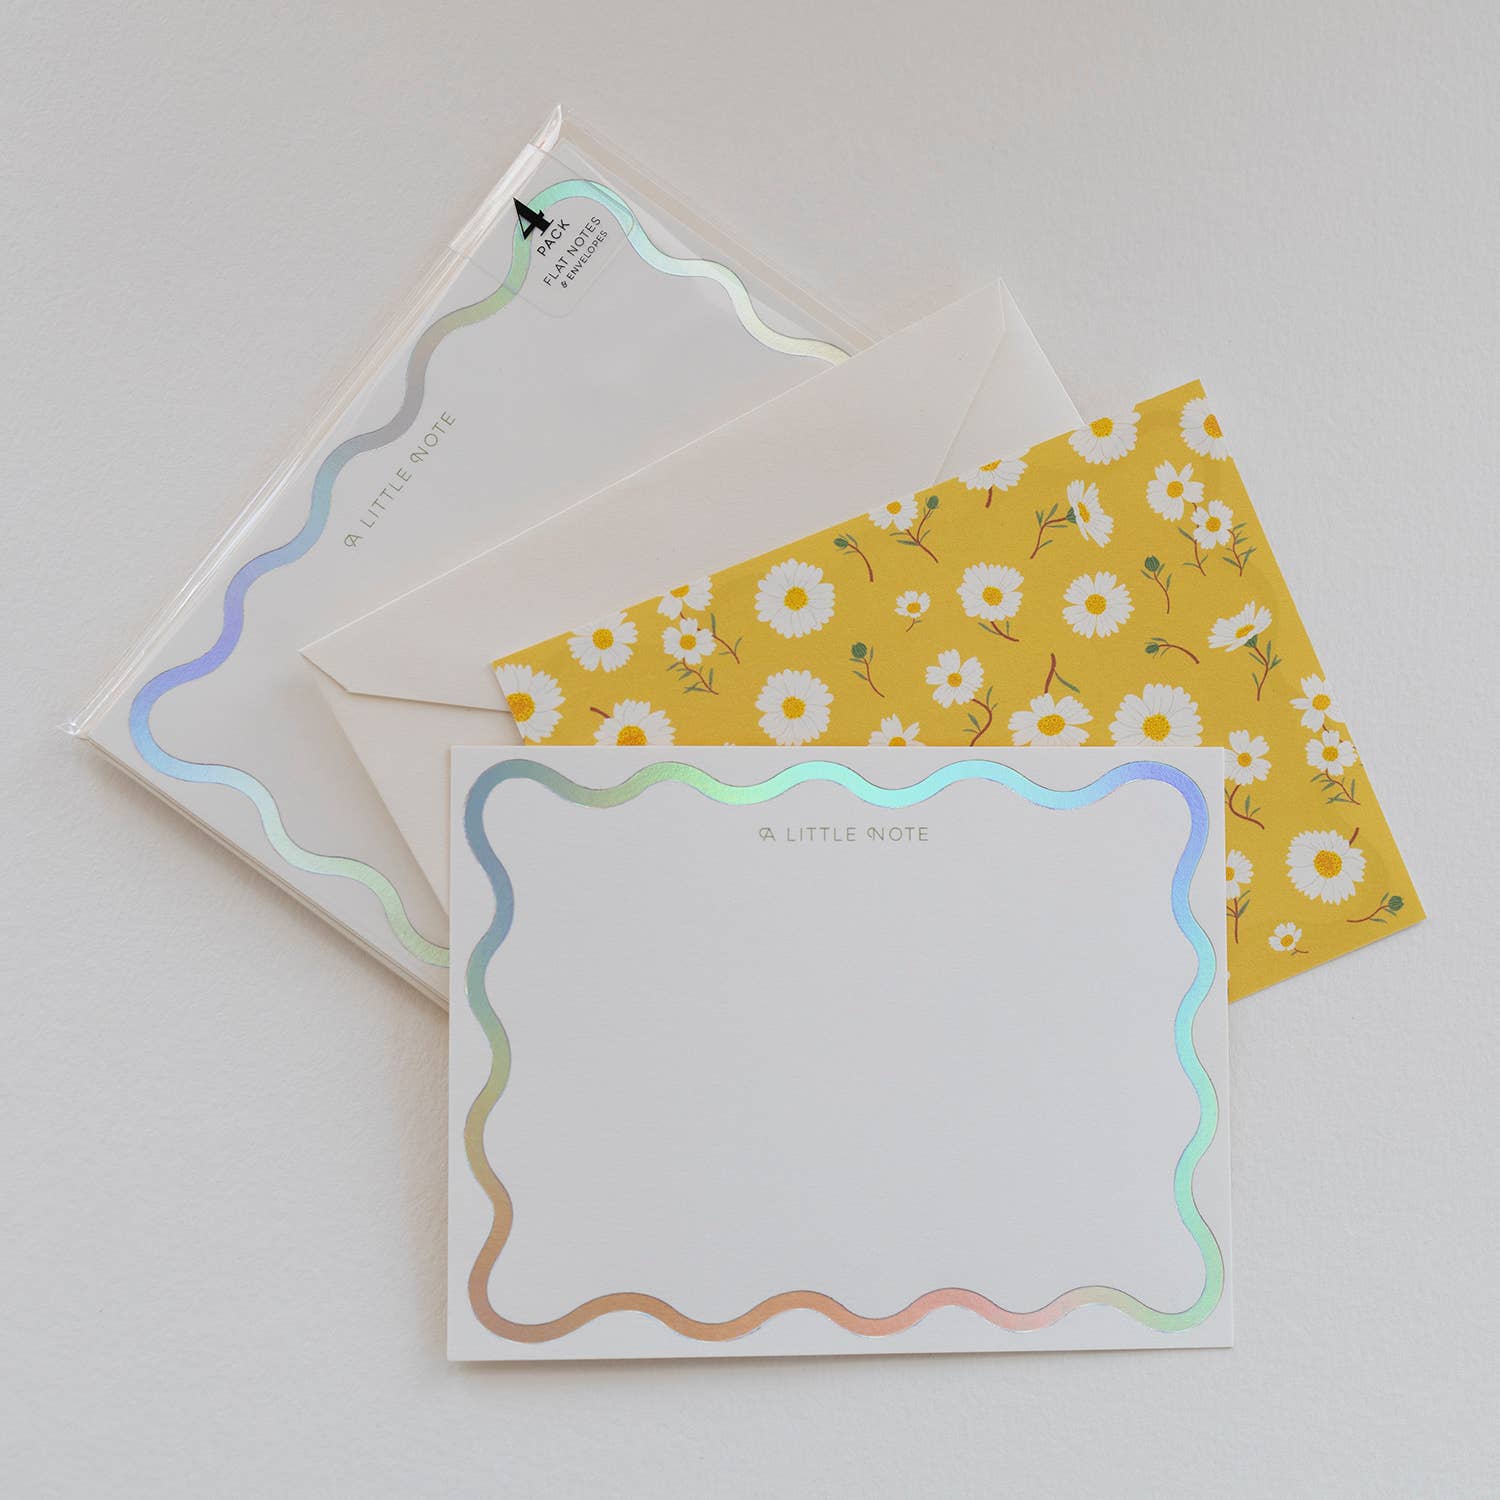 "A LITTLE NOTE" DAISY Notecards | Set of 4